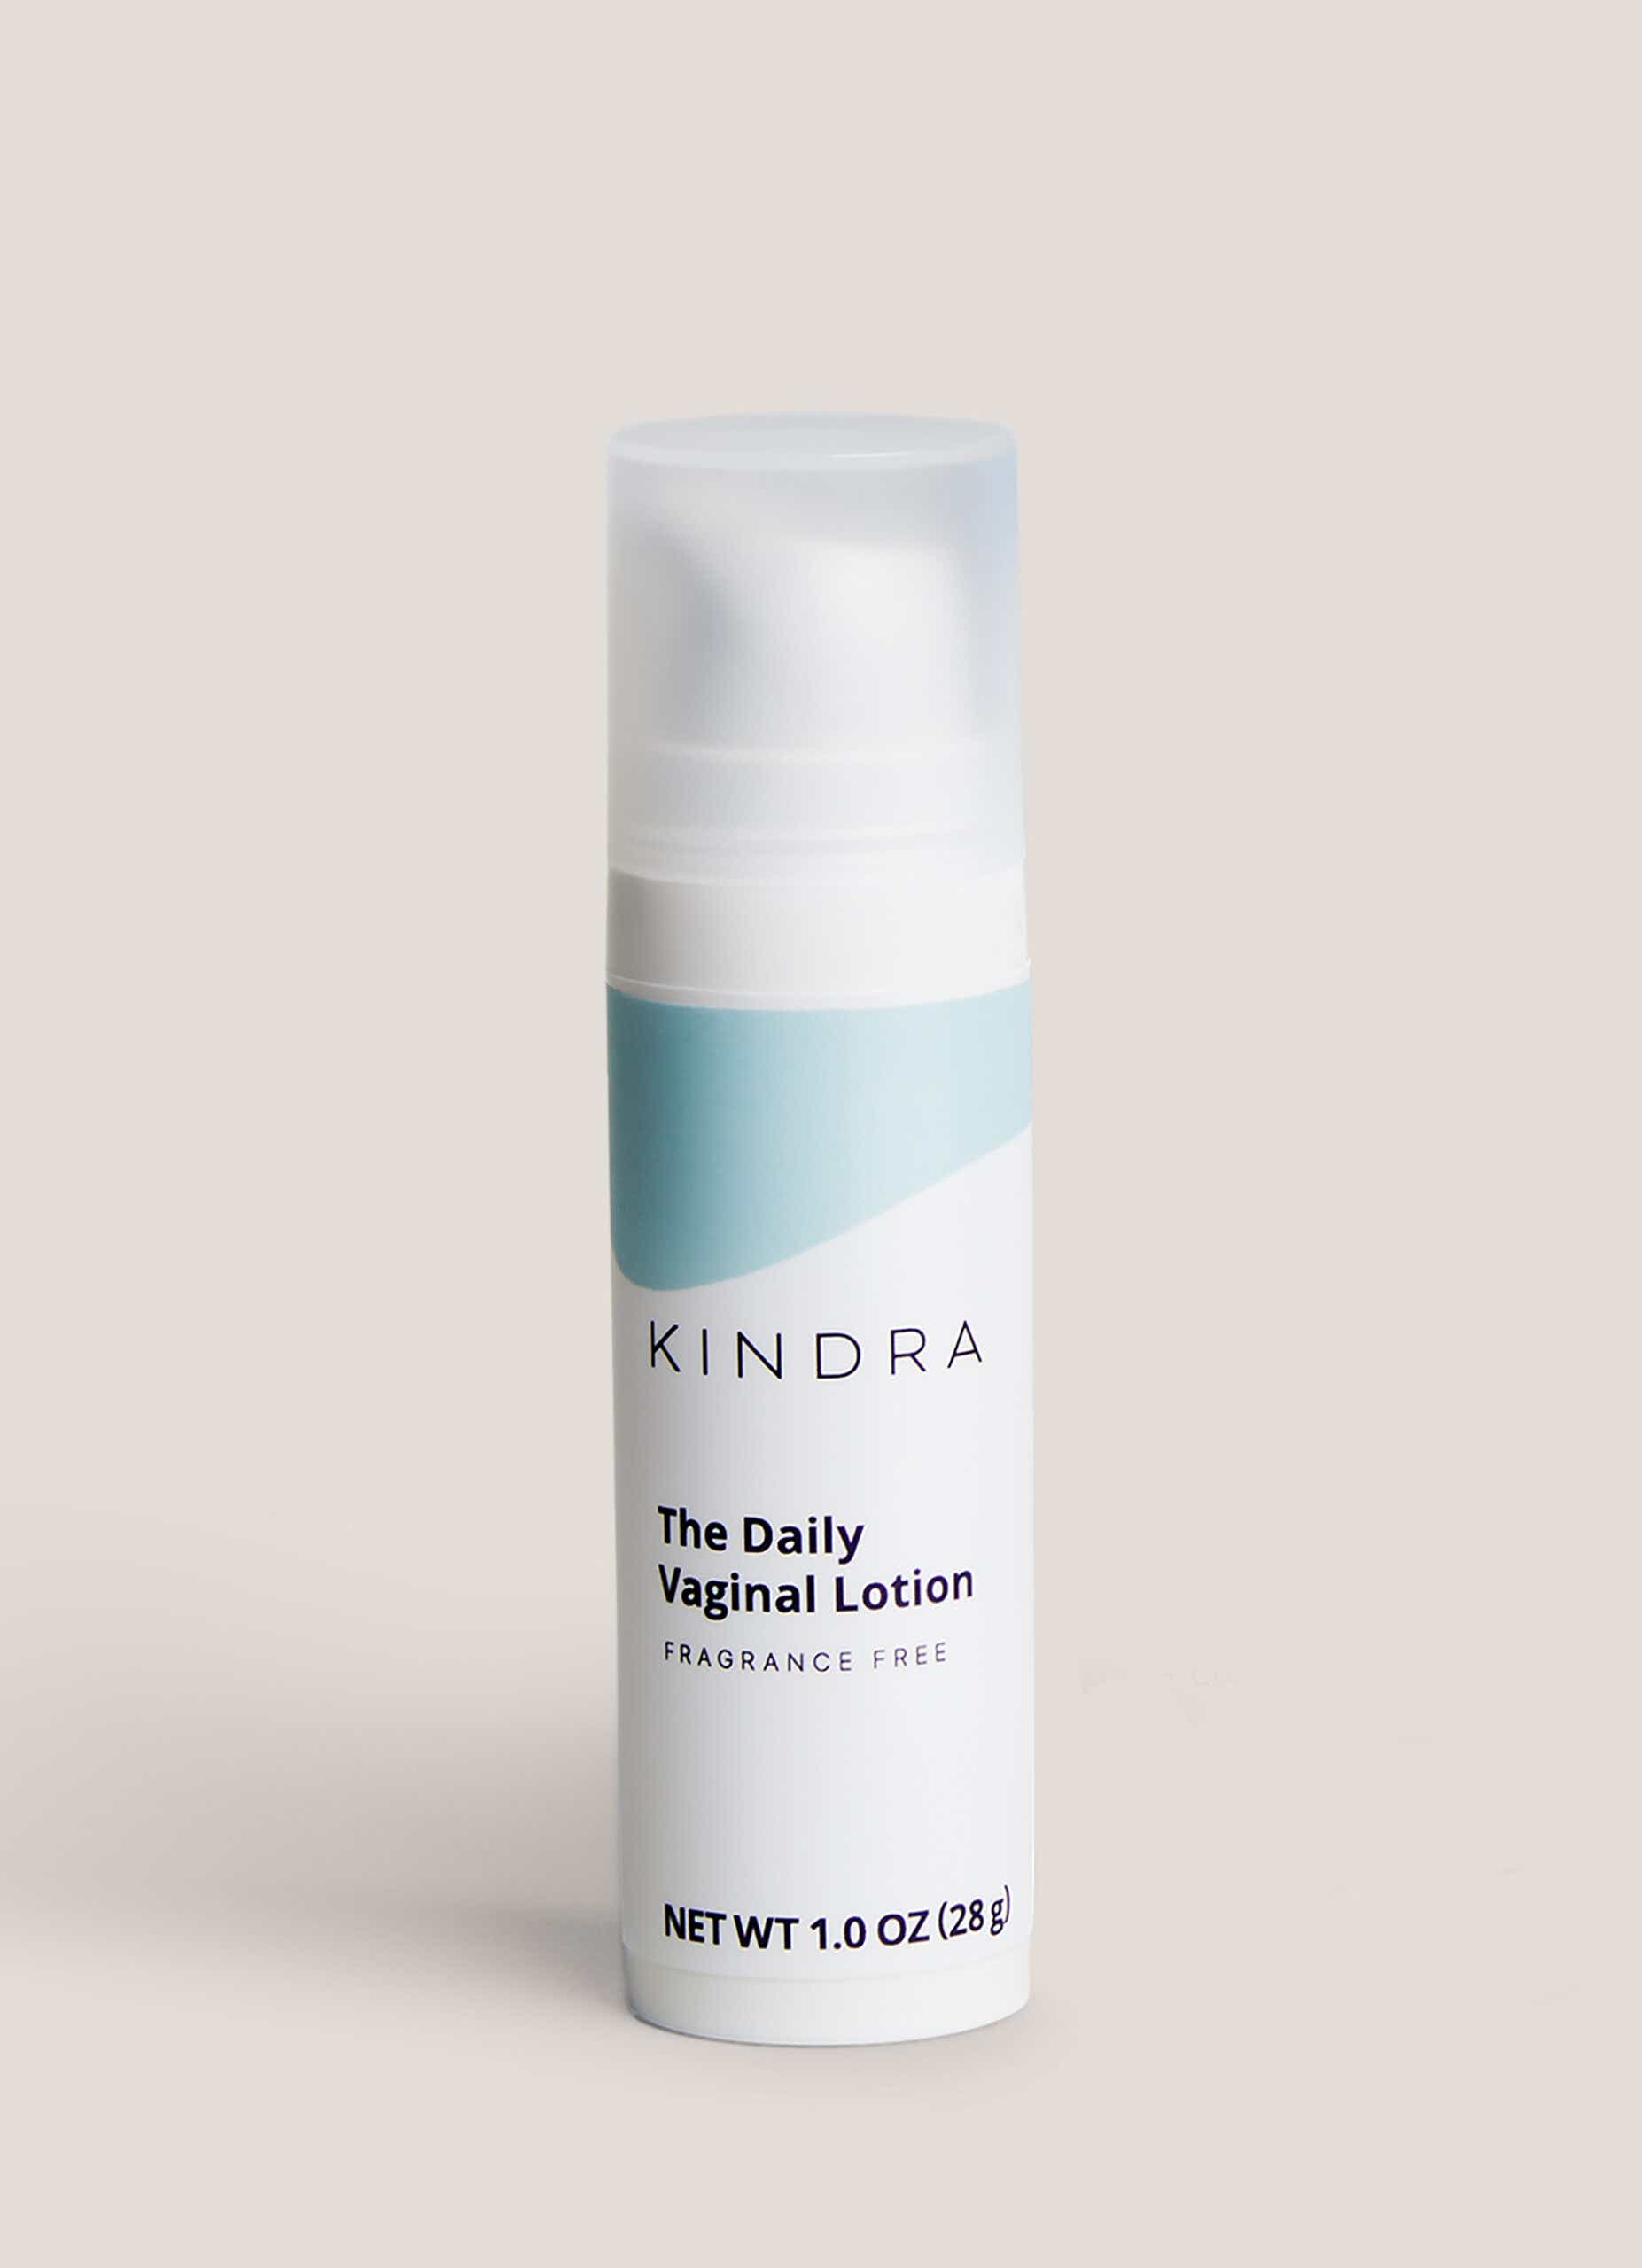 The Daily Vaginal Lotion